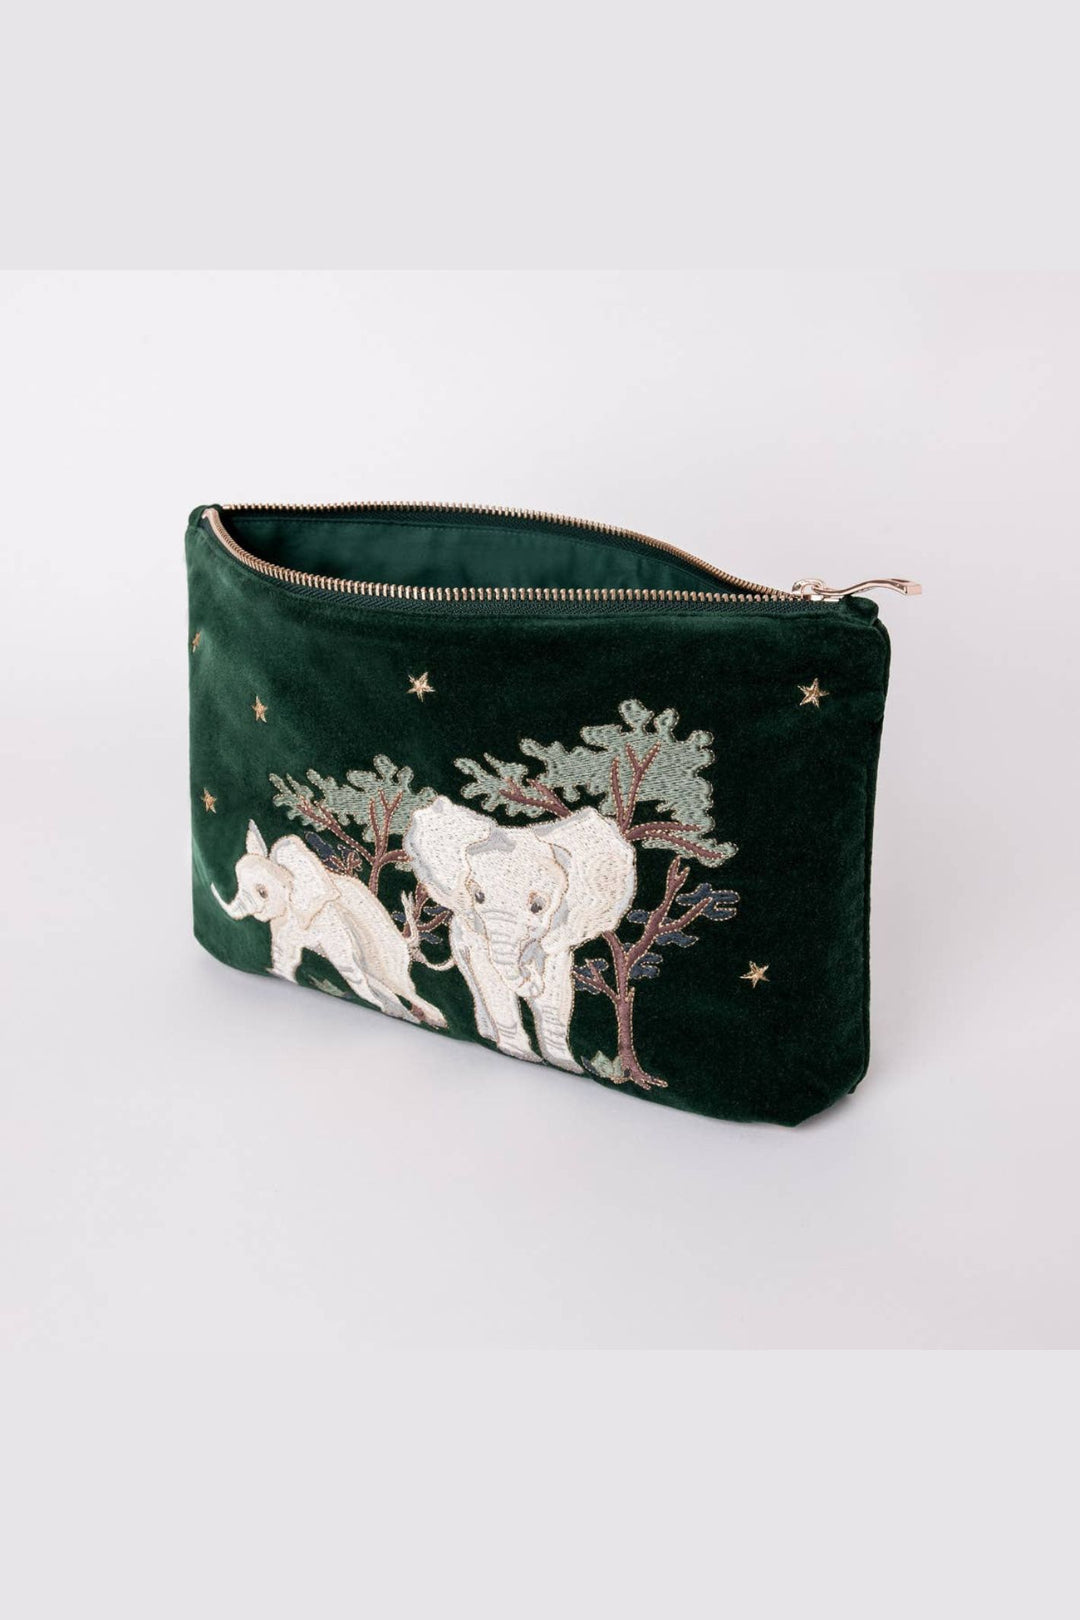 Elizabeth Scarlett Green Orphaned Elephants Conservation Collection Everyday Pouch